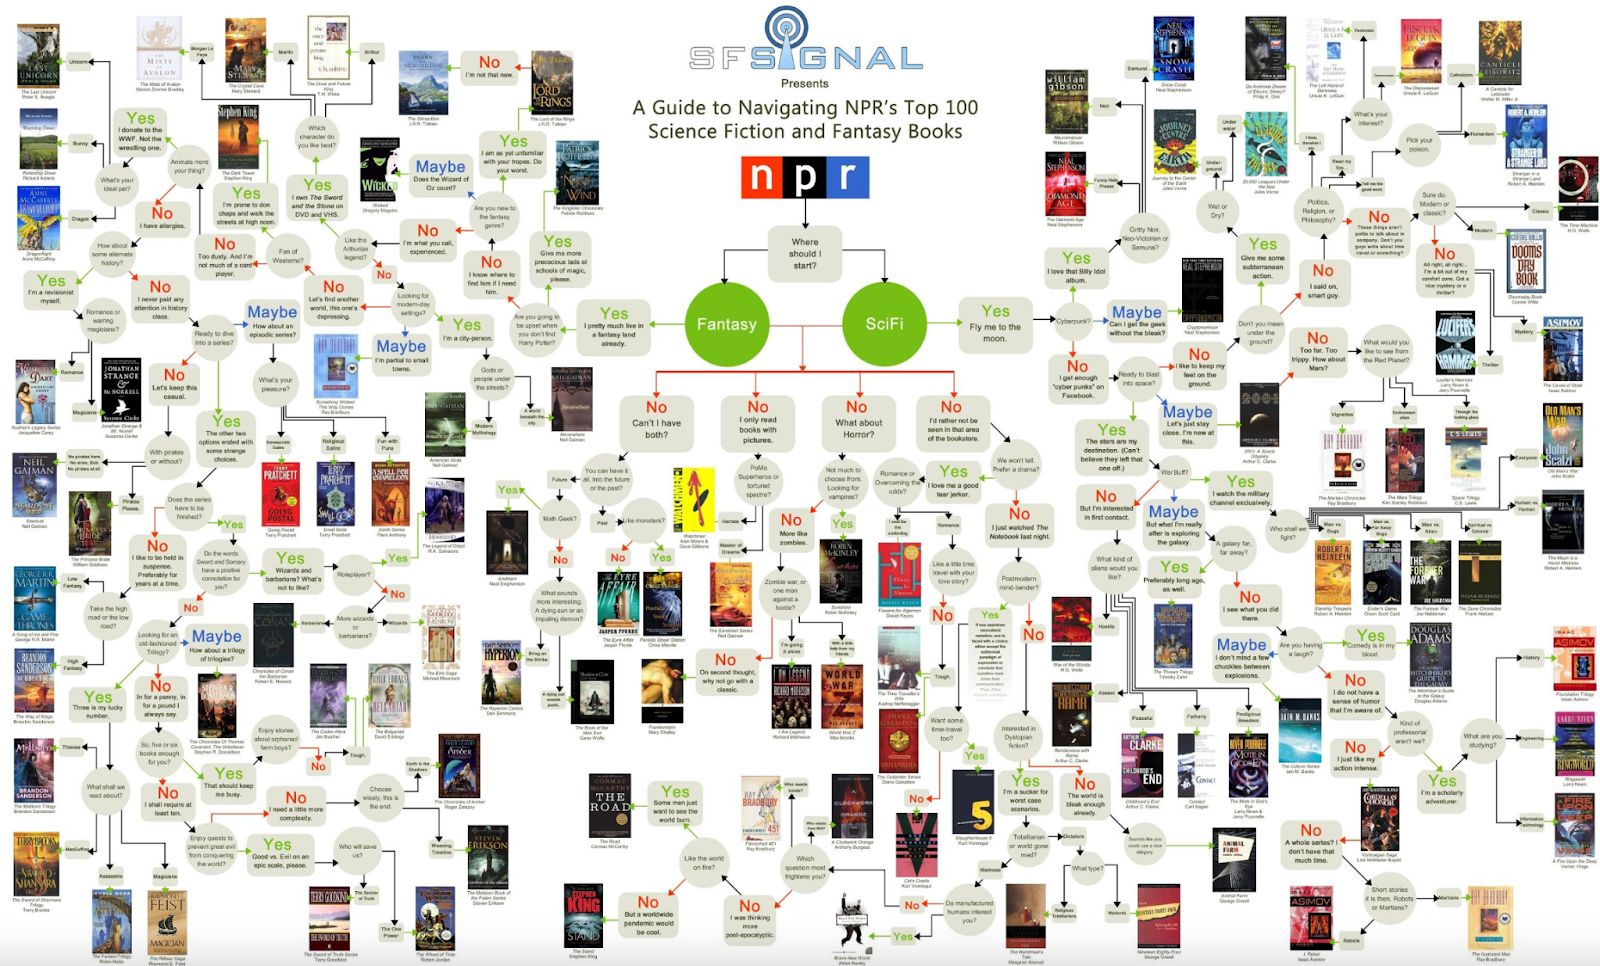 SF Signal's flow chart showing what fantasy and science fiction to read next, covering many authors from a massive NPR survey of SFF readers. Books shown include: The Name of the Wind by Patrick Rothfuss, the Sword of Shannara Trilogy by Terry Brooks, and The Way of Kings by Brandon Sanderson.